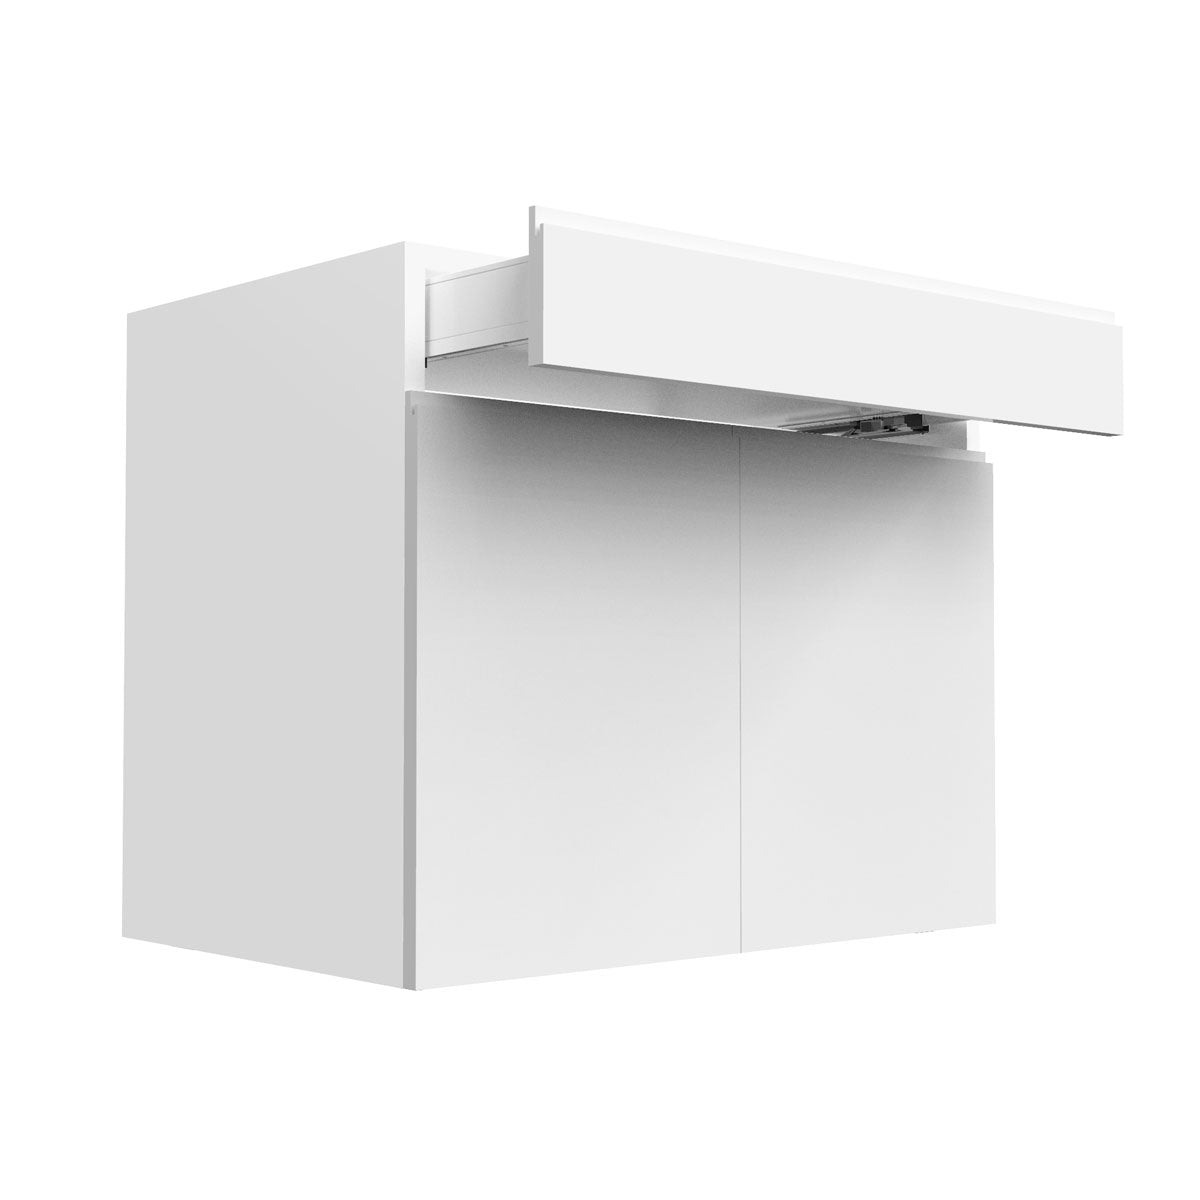 Vanity Cabinet - RTA - Lacquer White - Double Door | 36"W x 34.5"H x 21"D